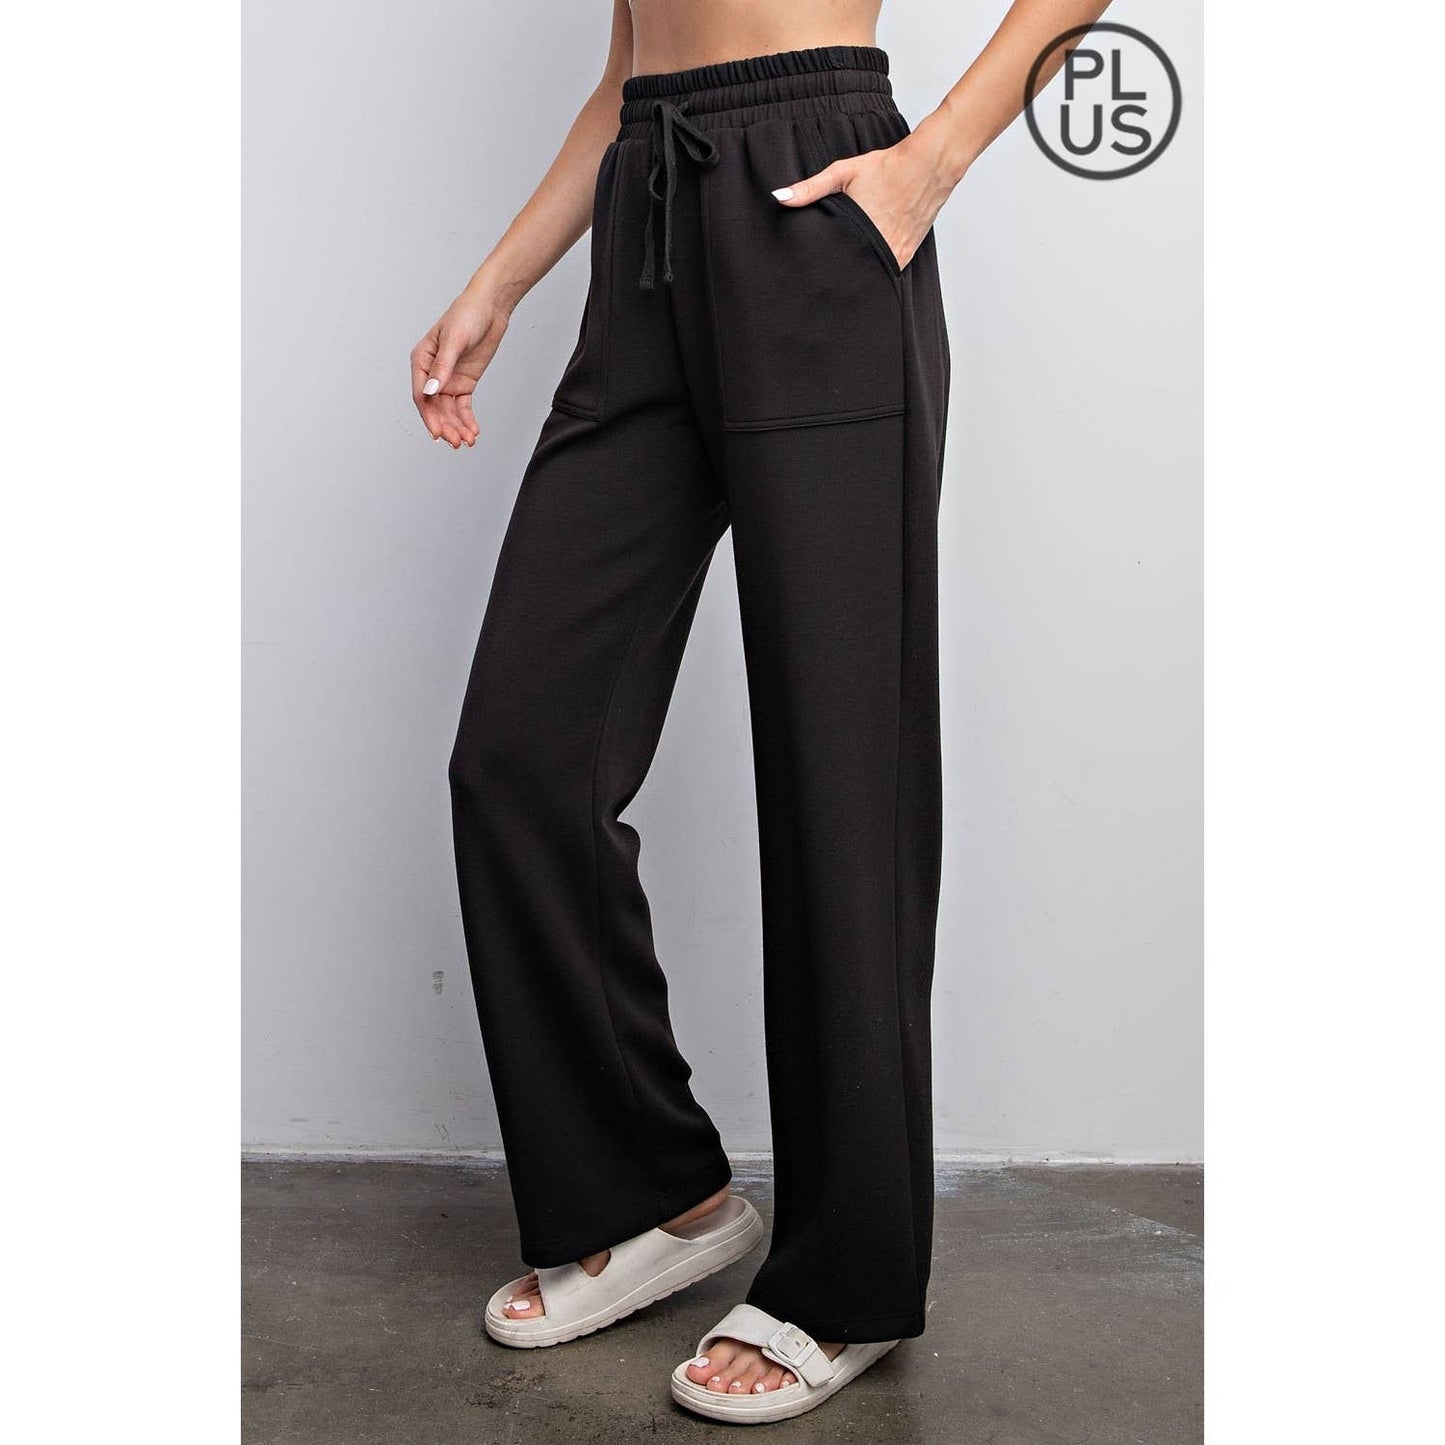 PLUS SIZE MODAL POLY SPAN STRAIGHT LOUNGE PANTS WITH POCKETS  (Spanx Air Essentials Dupe)